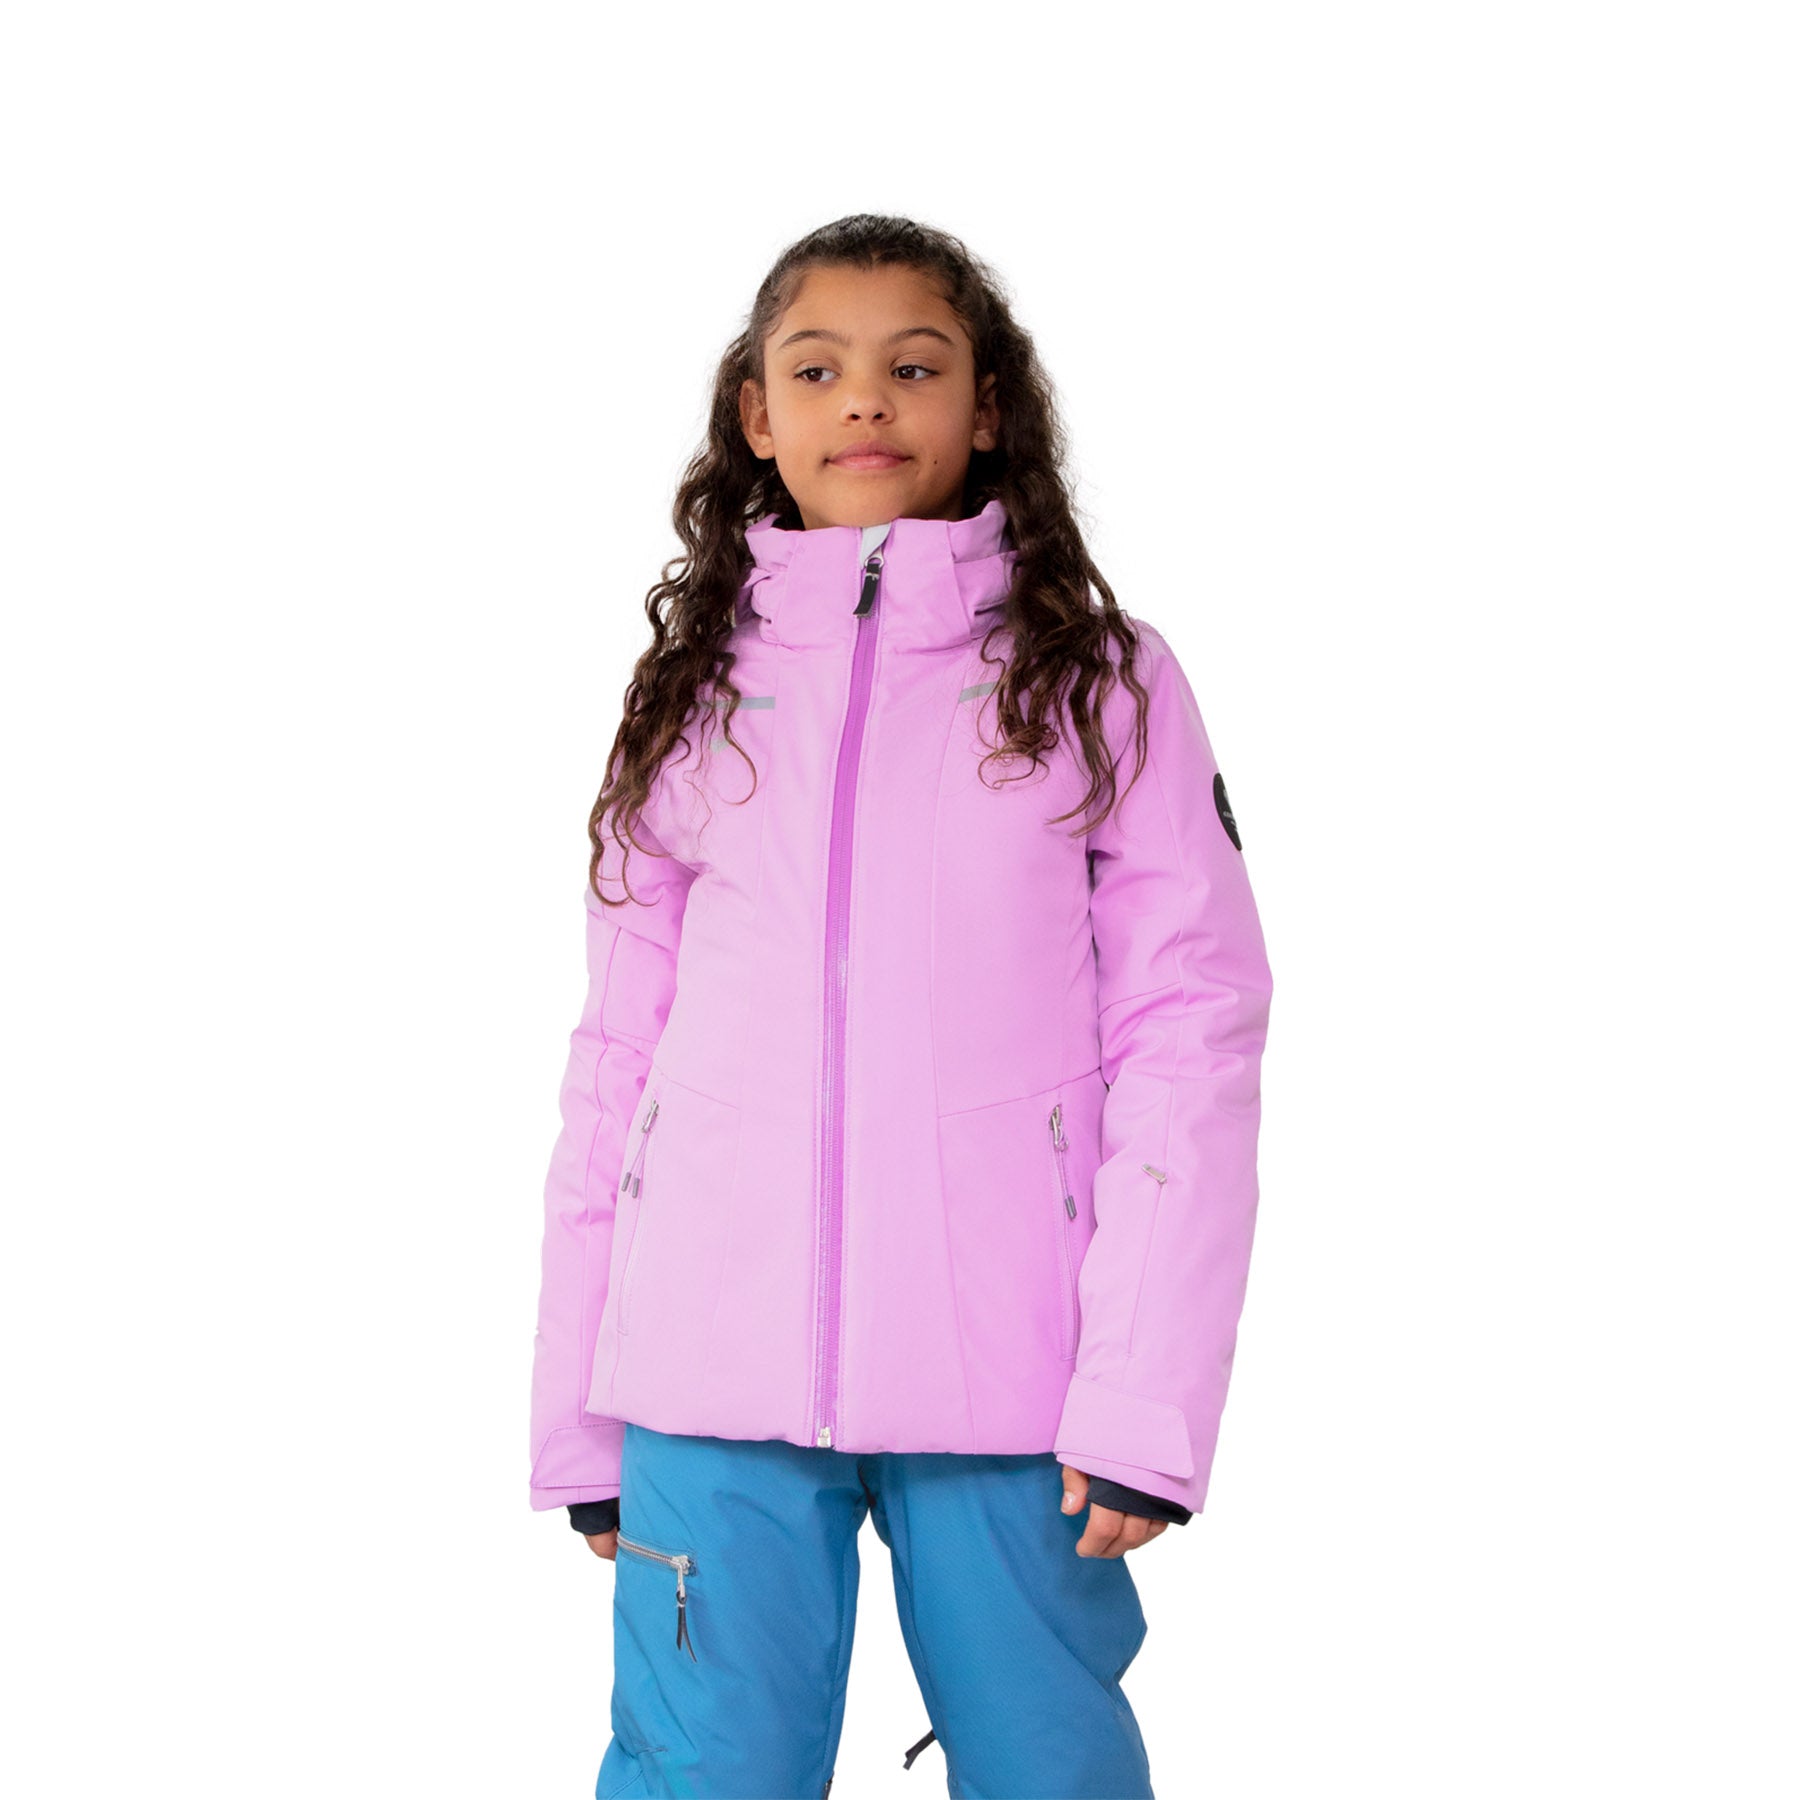 Hero image featuring a female model wearing the Obermeyer Leia Jacket in fairytale light purple with blue ski pants.